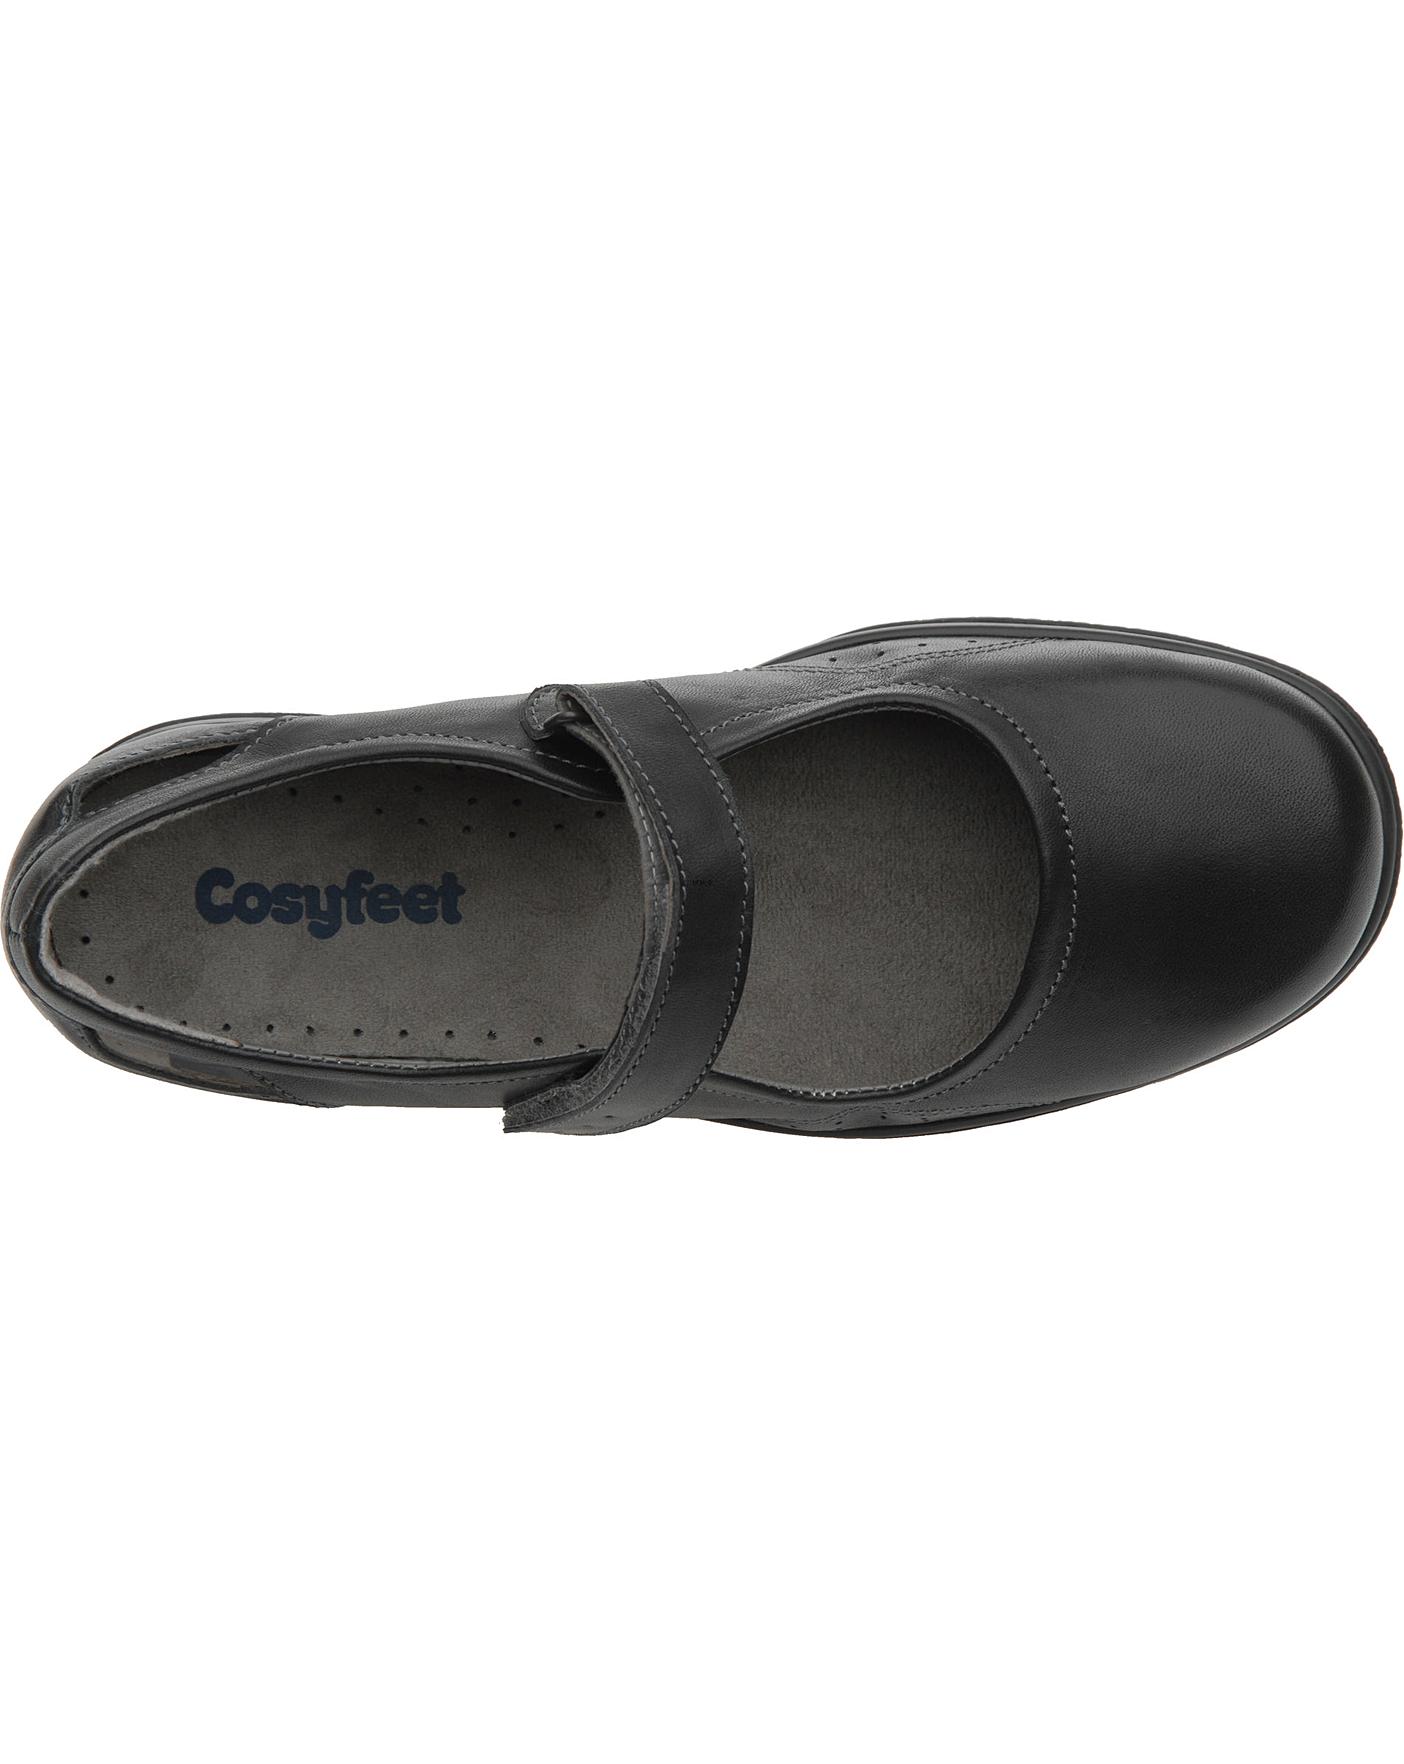 6E Width Cosyfeet Paradise Extra Roomy Shoes